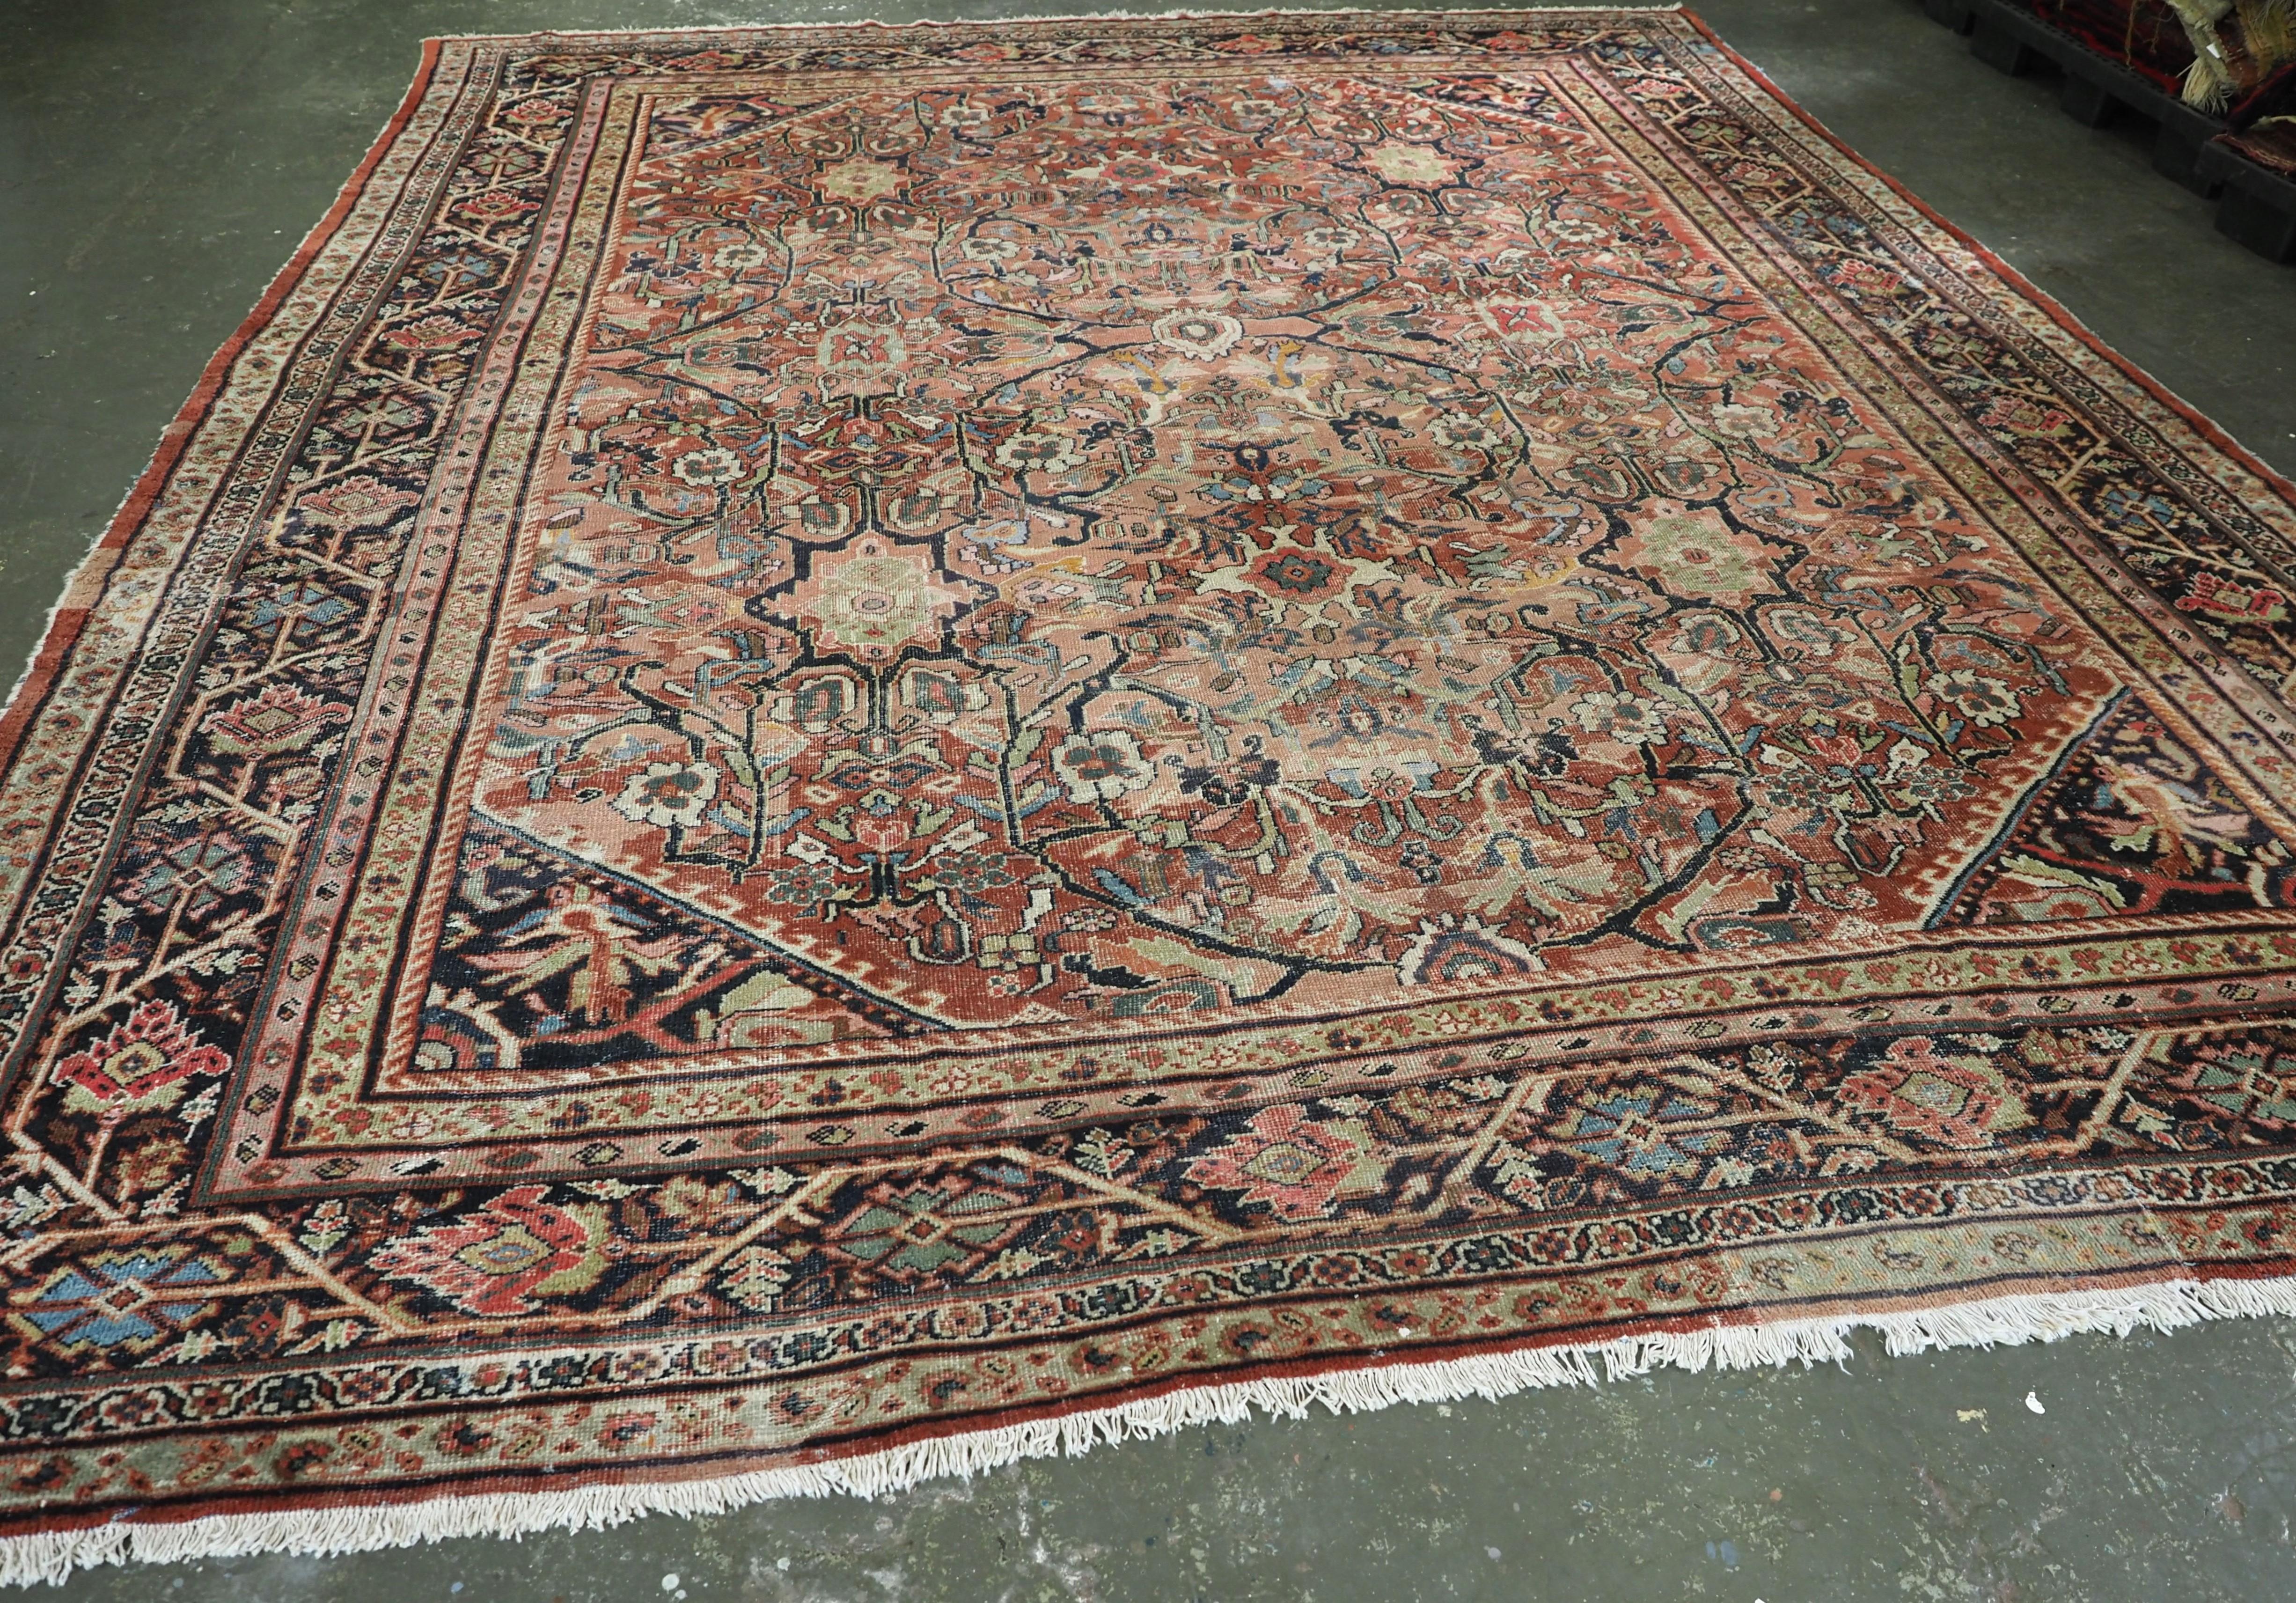 Size: 14ft 1in x 10ft 11in (430 x 332cm).

Antique Mahal carpet of very good large room size in pastel colours.

Circa 1900.

The carpet has an all over floral design in soft pastel colours with shades of pink and soft reds, the design highlights